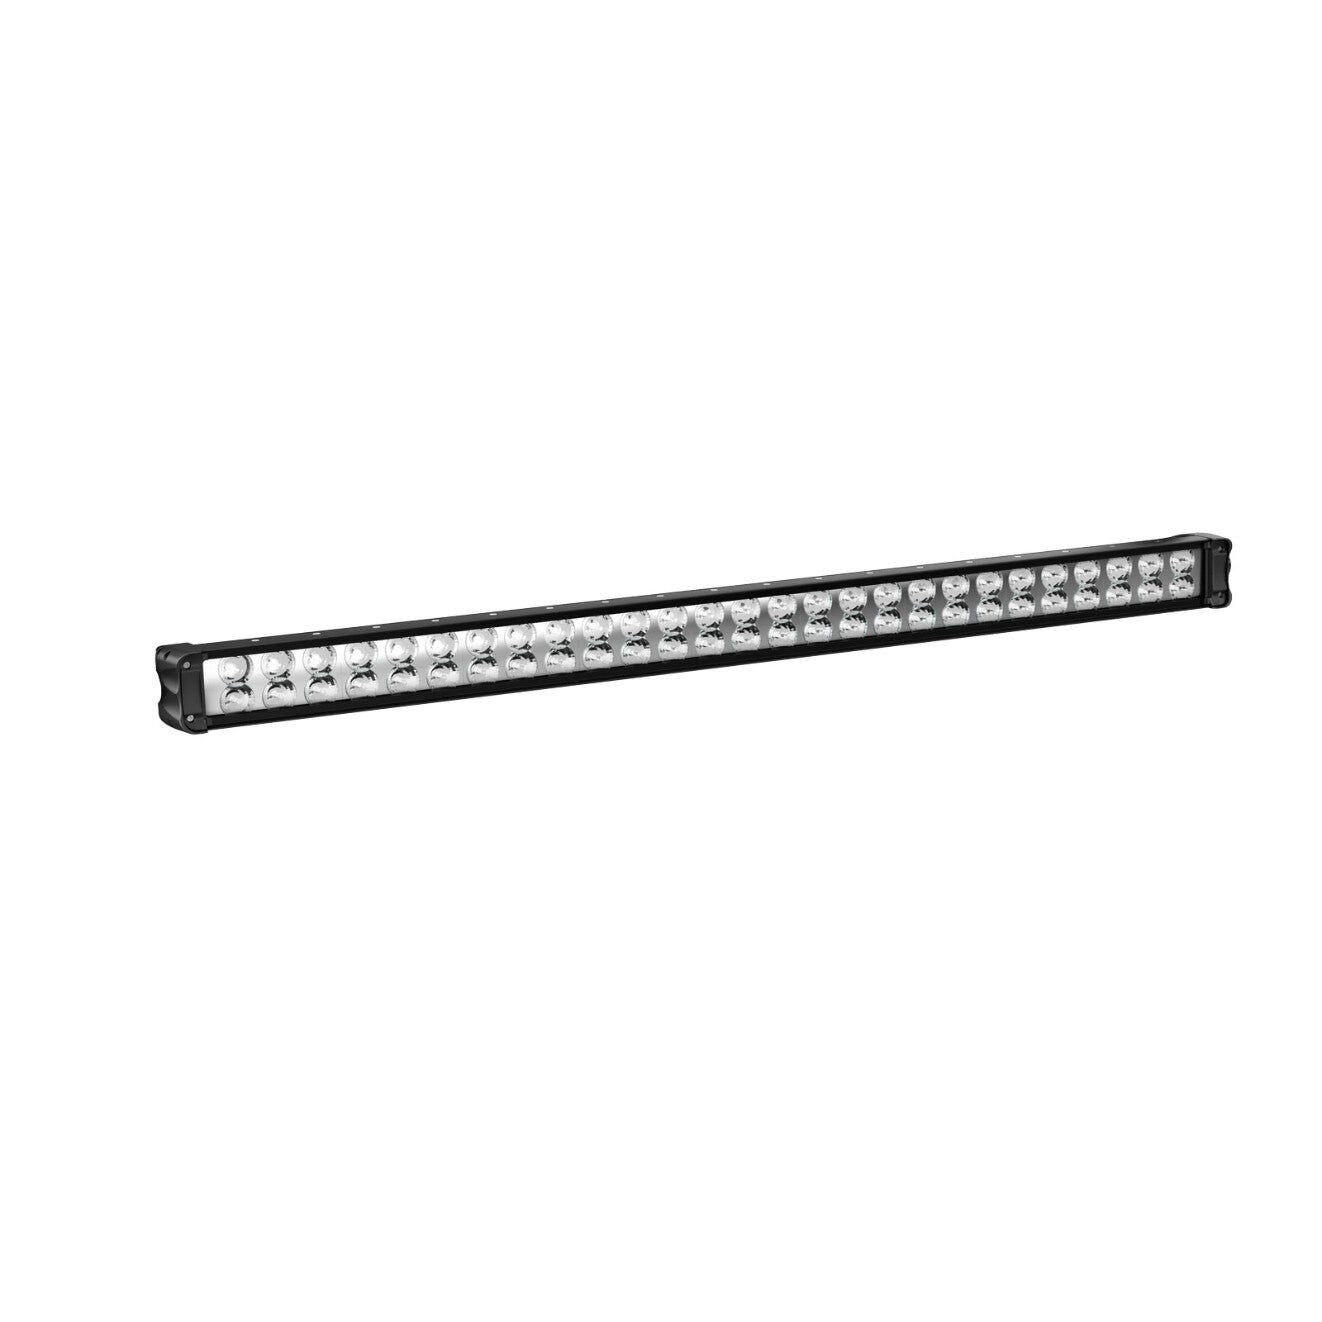 Can-am 39" (99 cm) Double Stacked LED Light Bar (270W) 715004007 - The Parts Lodge